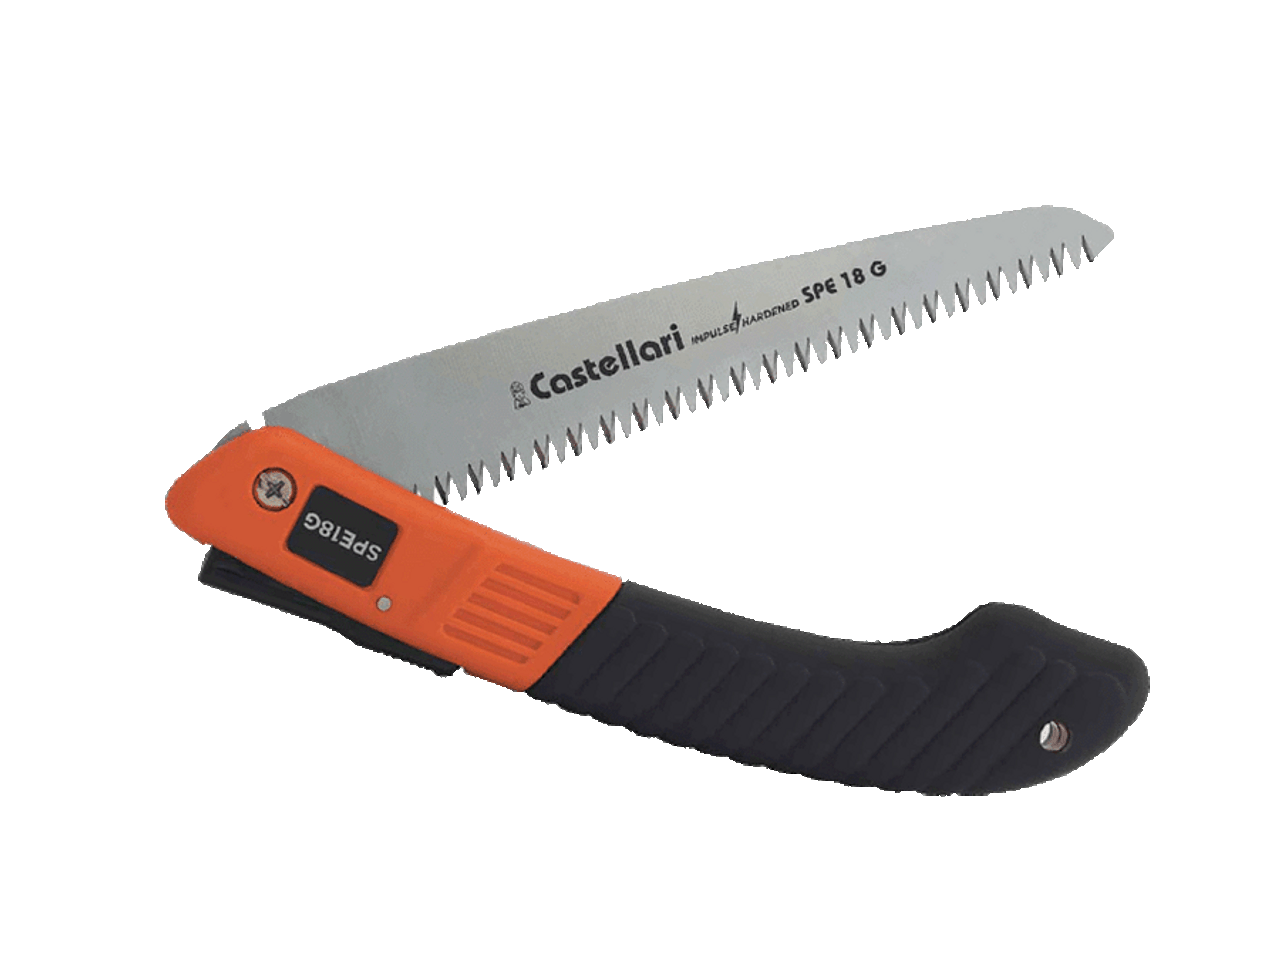 The SPE-18G folding saw is safe to use thanks to its snap closure.